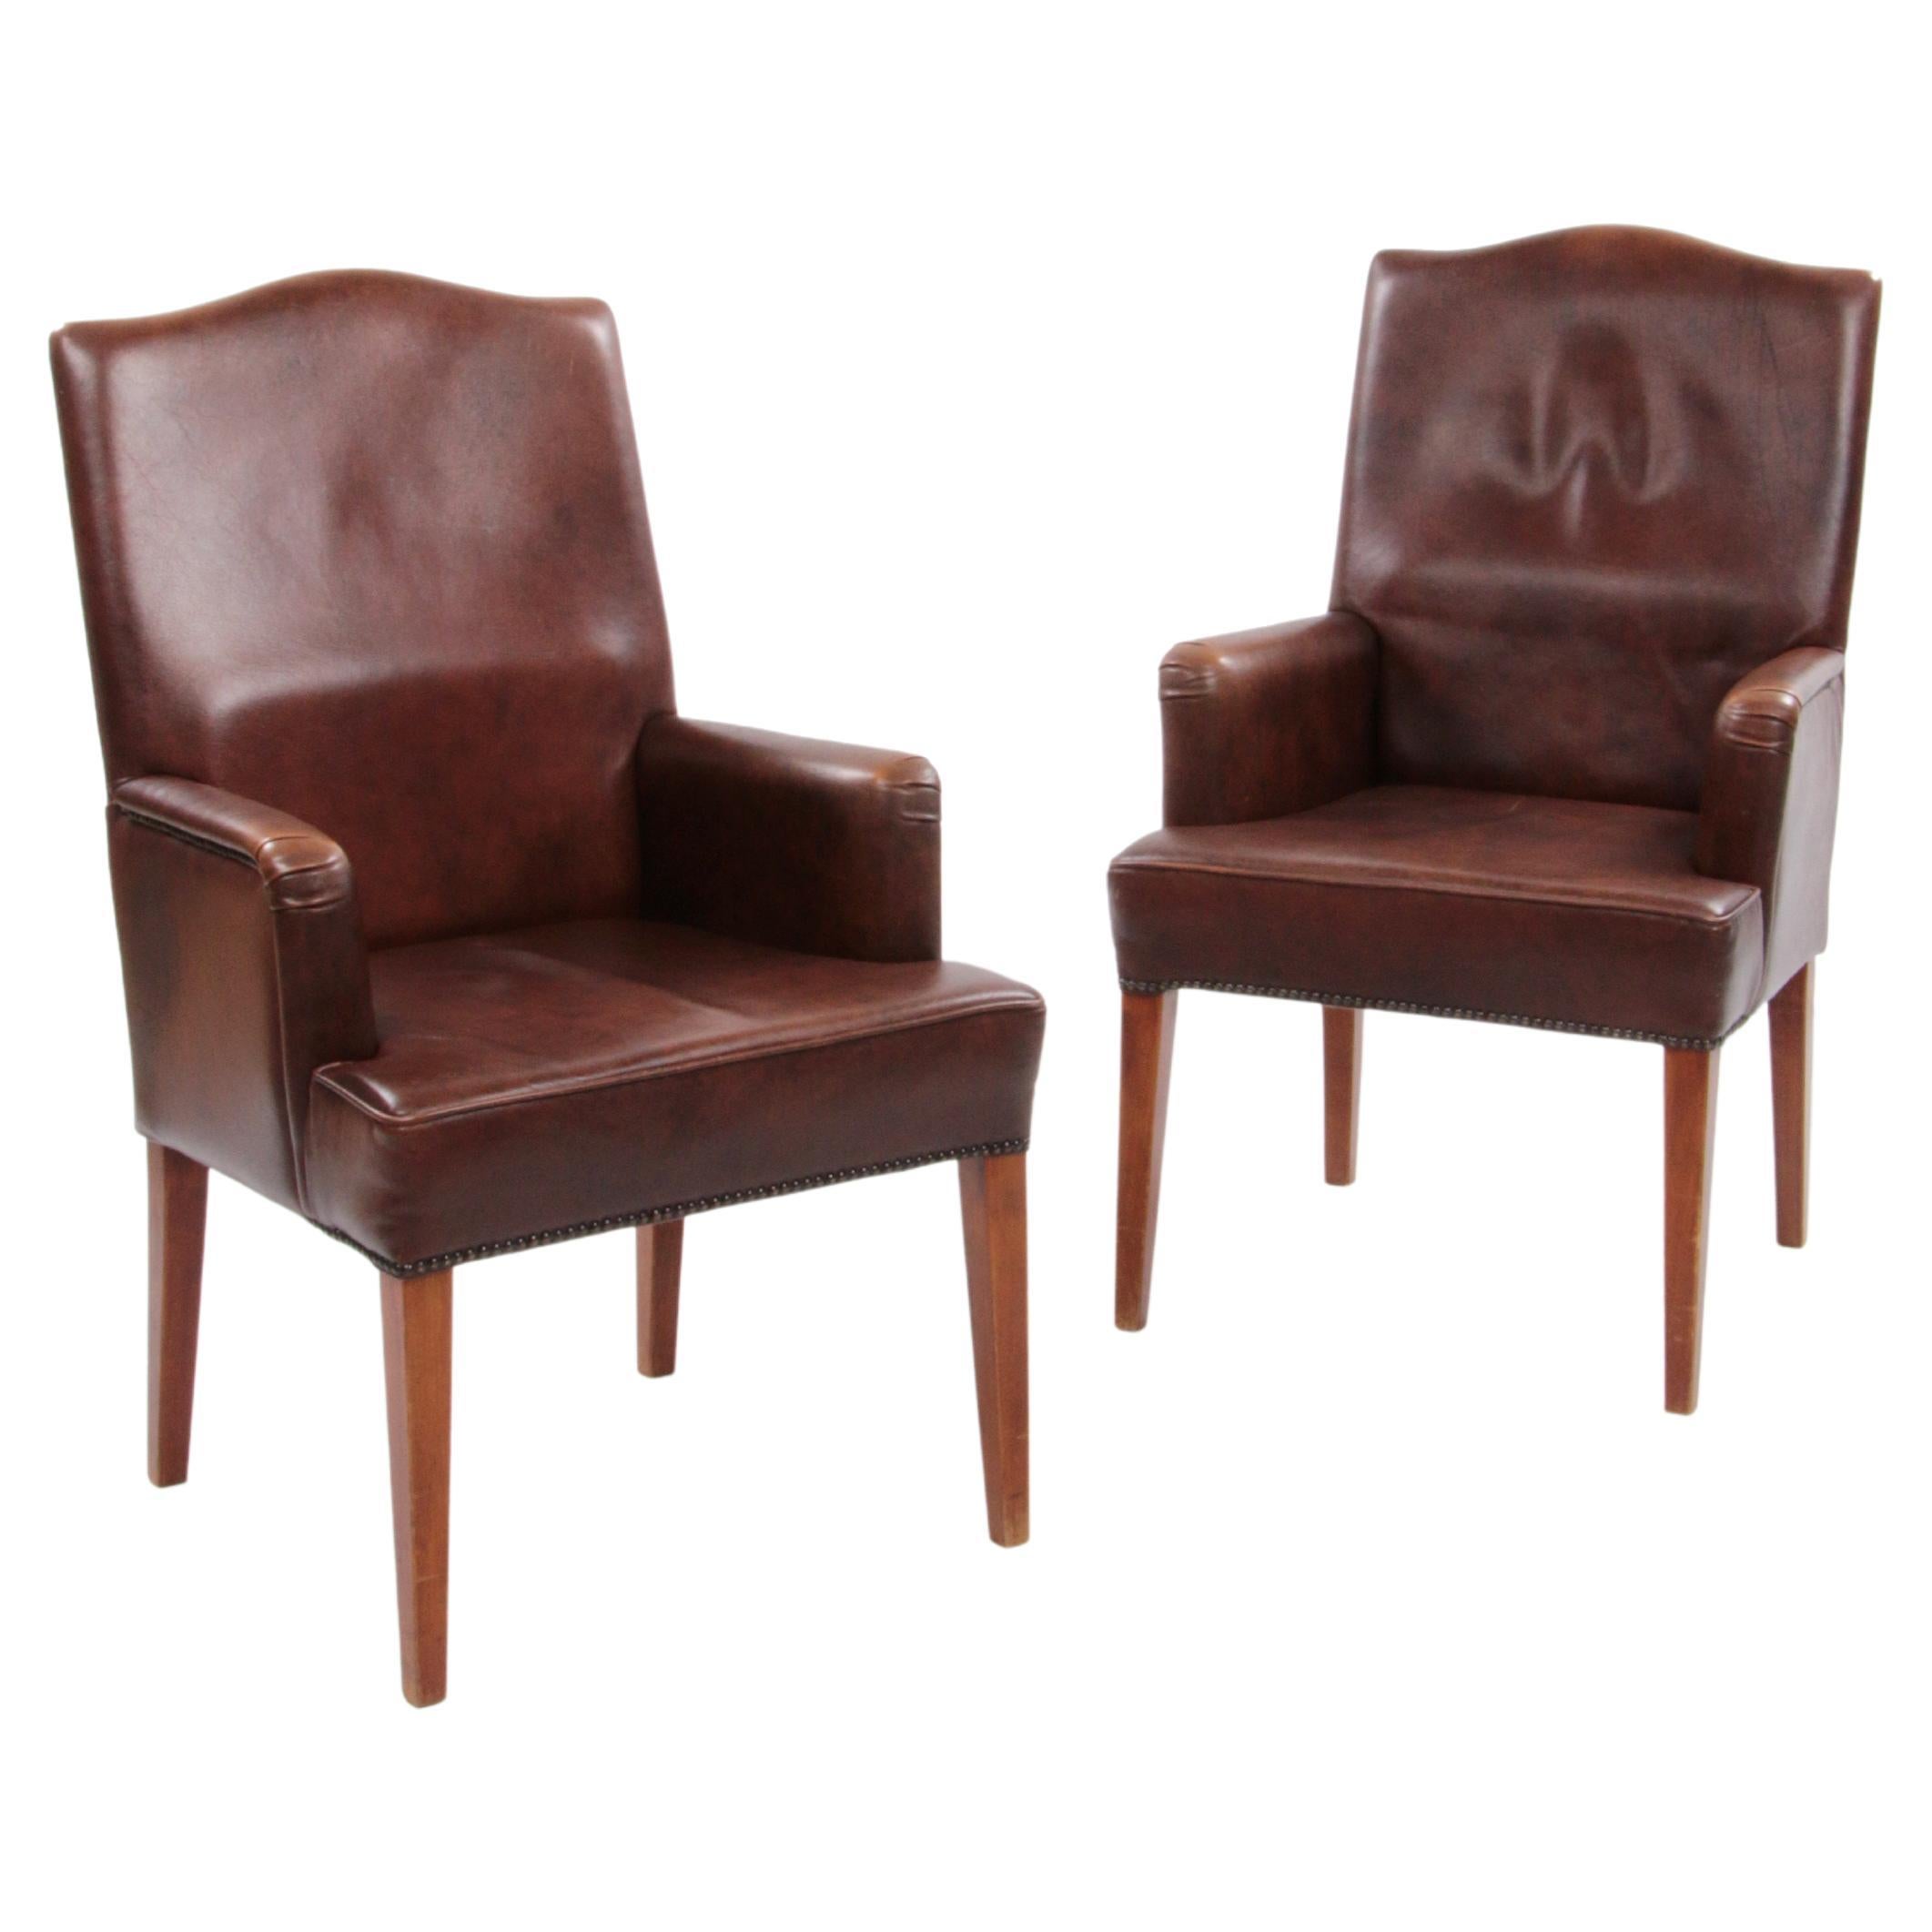 Set of 2 dining room chairs in sheep leather, 1970 Netherlands. For Sale